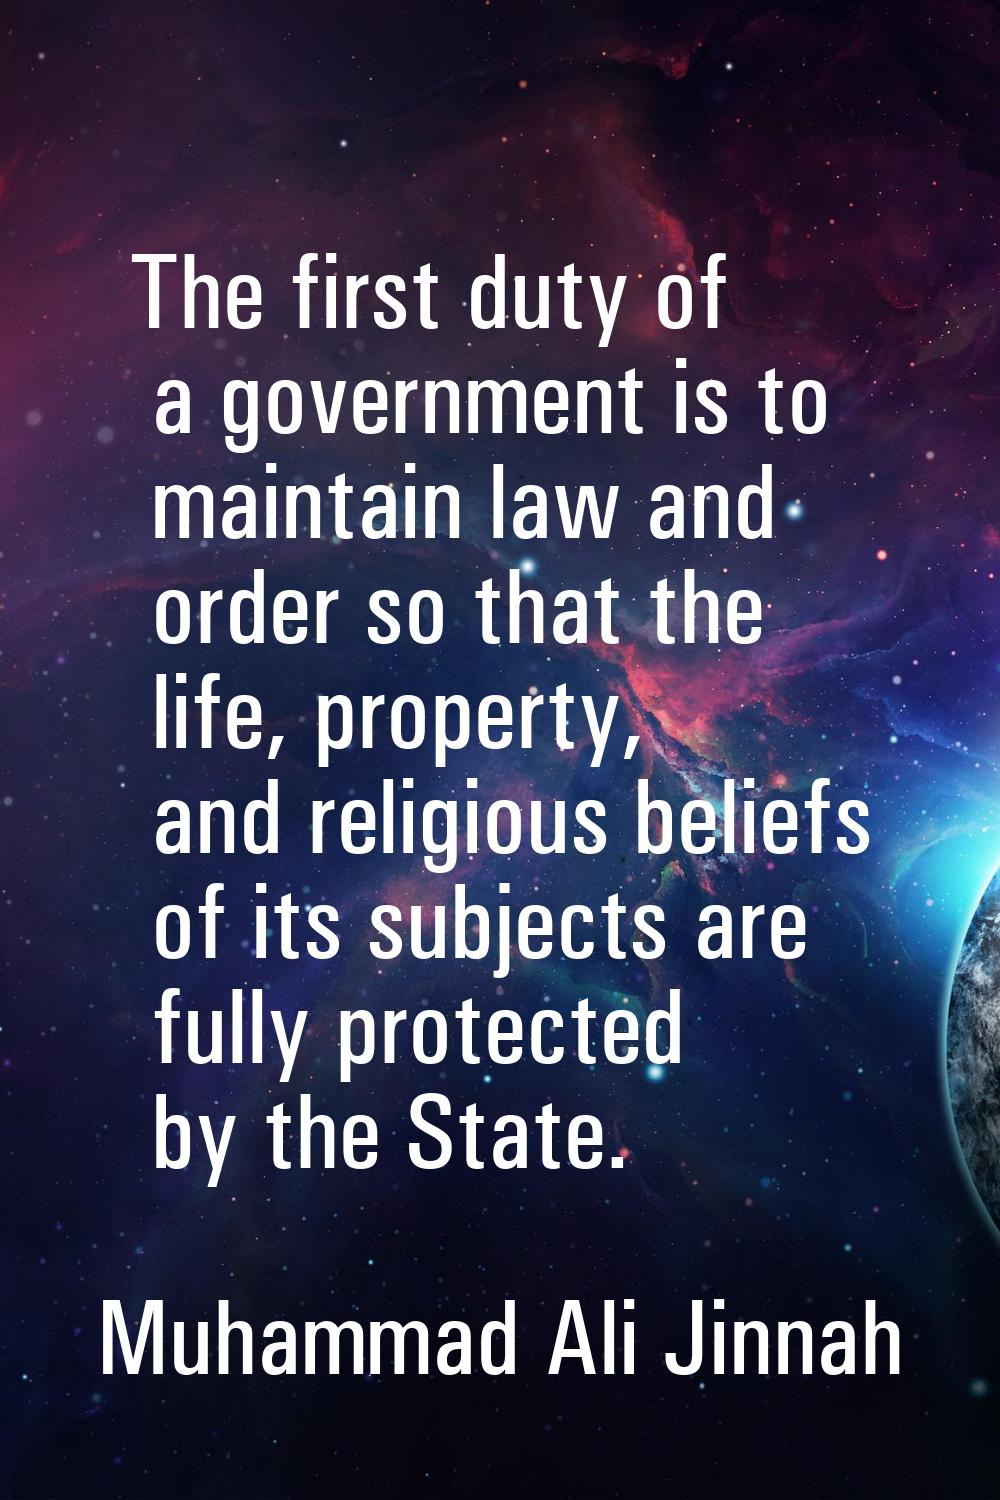 The first duty of a government is to maintain law and order so that the life, property, and religio